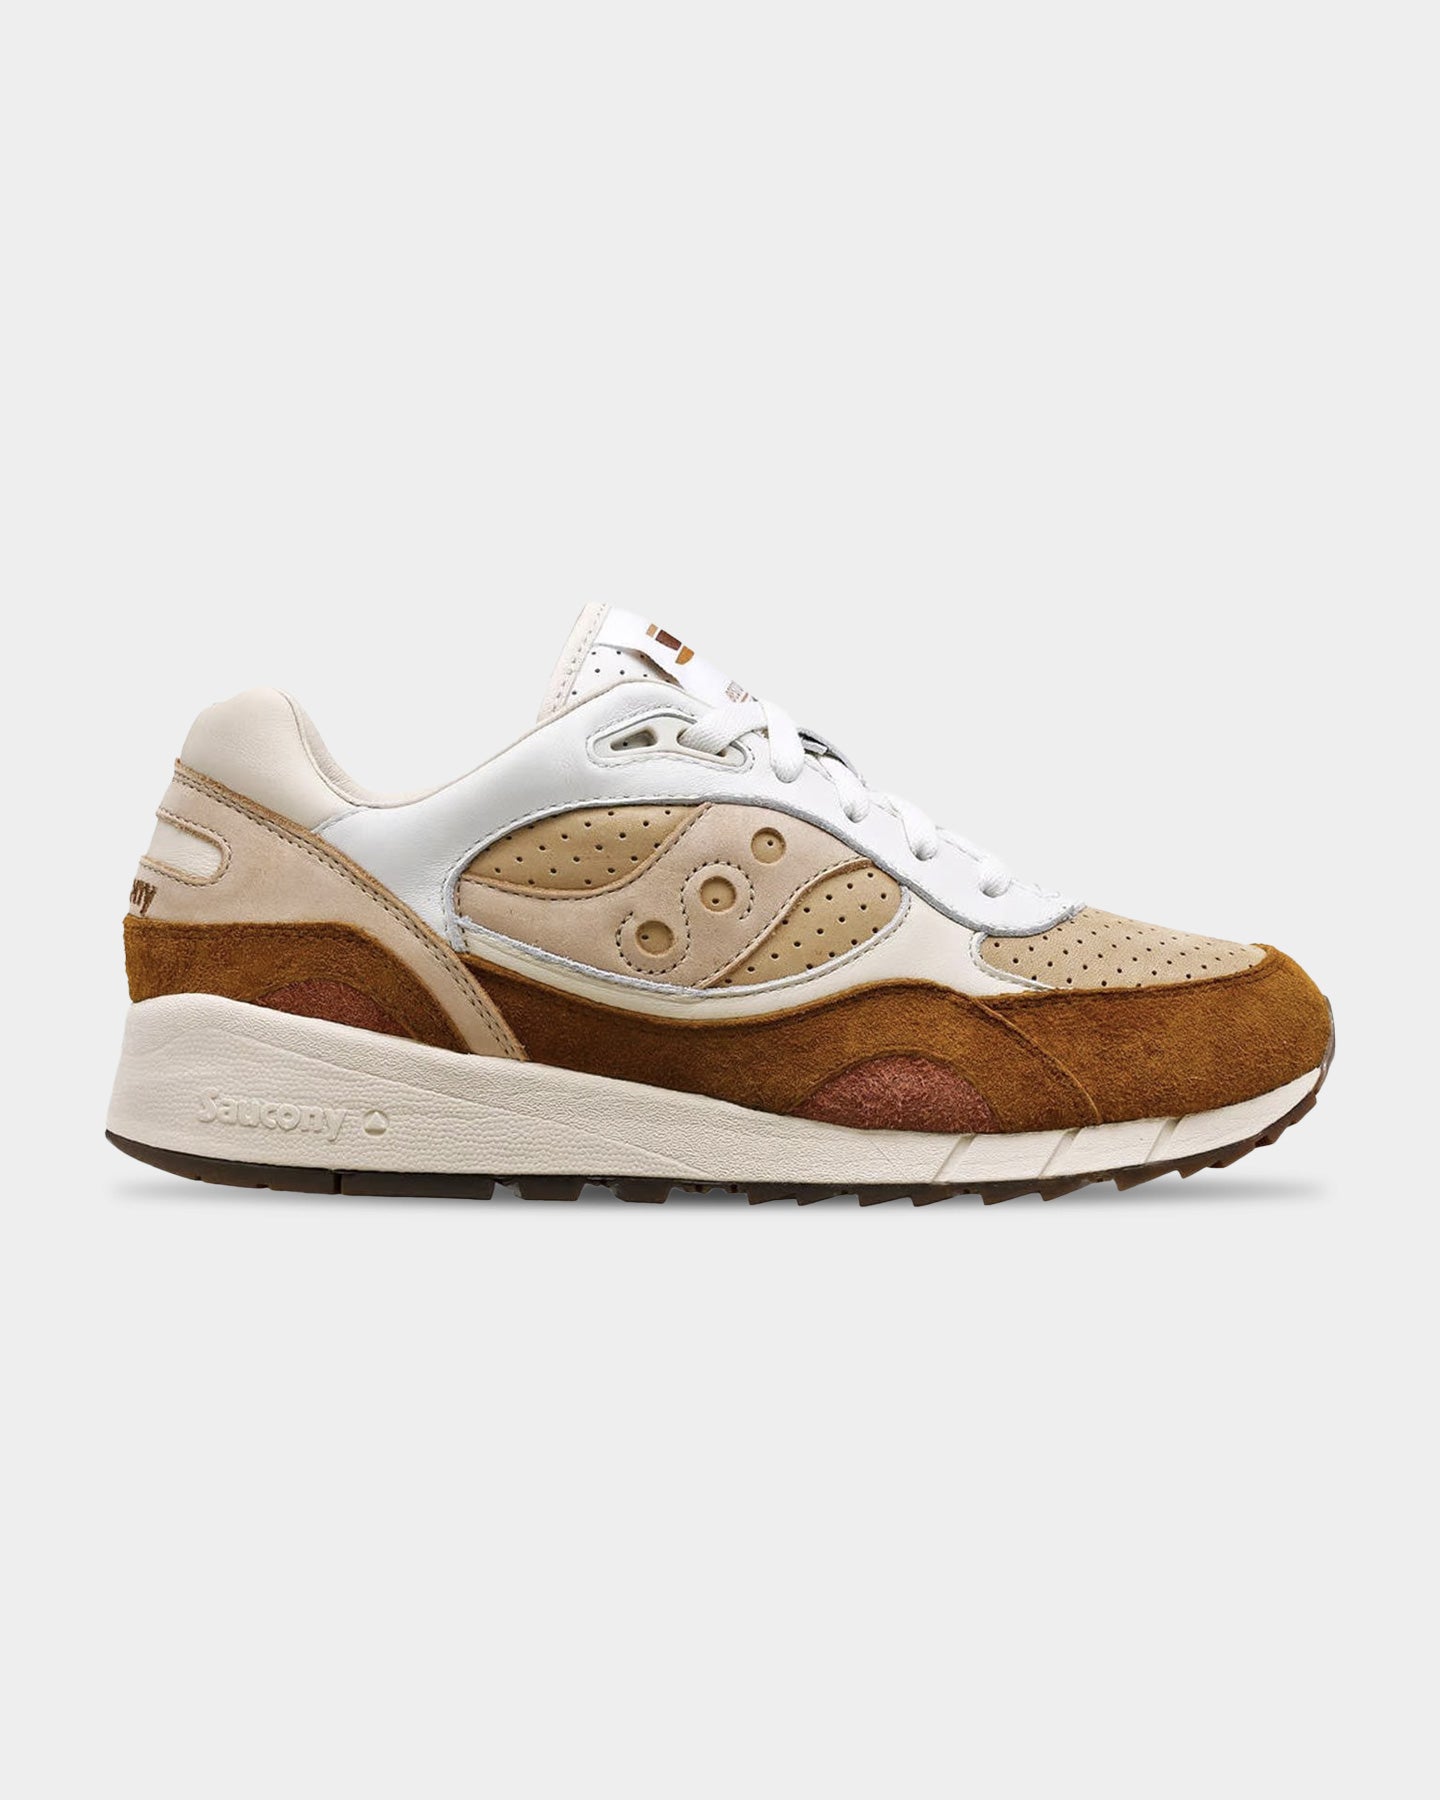 SHADOW 6000 - brown/white